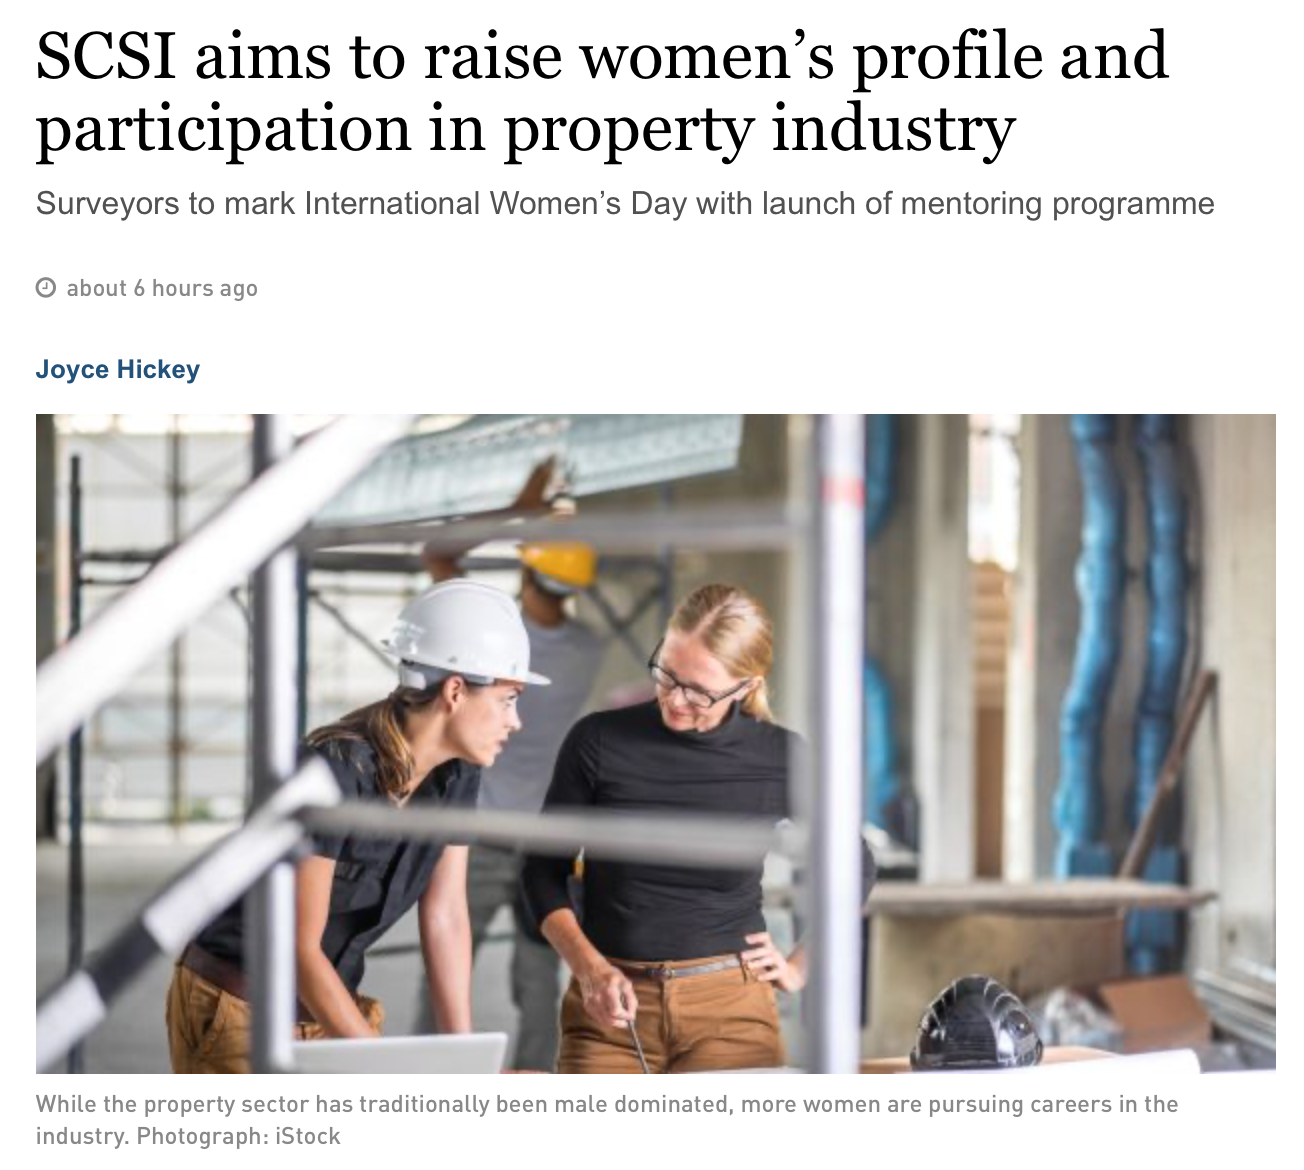 SCSI – Society of Chartered Surveyors Ireland Elevate Mentoring Programme for Women